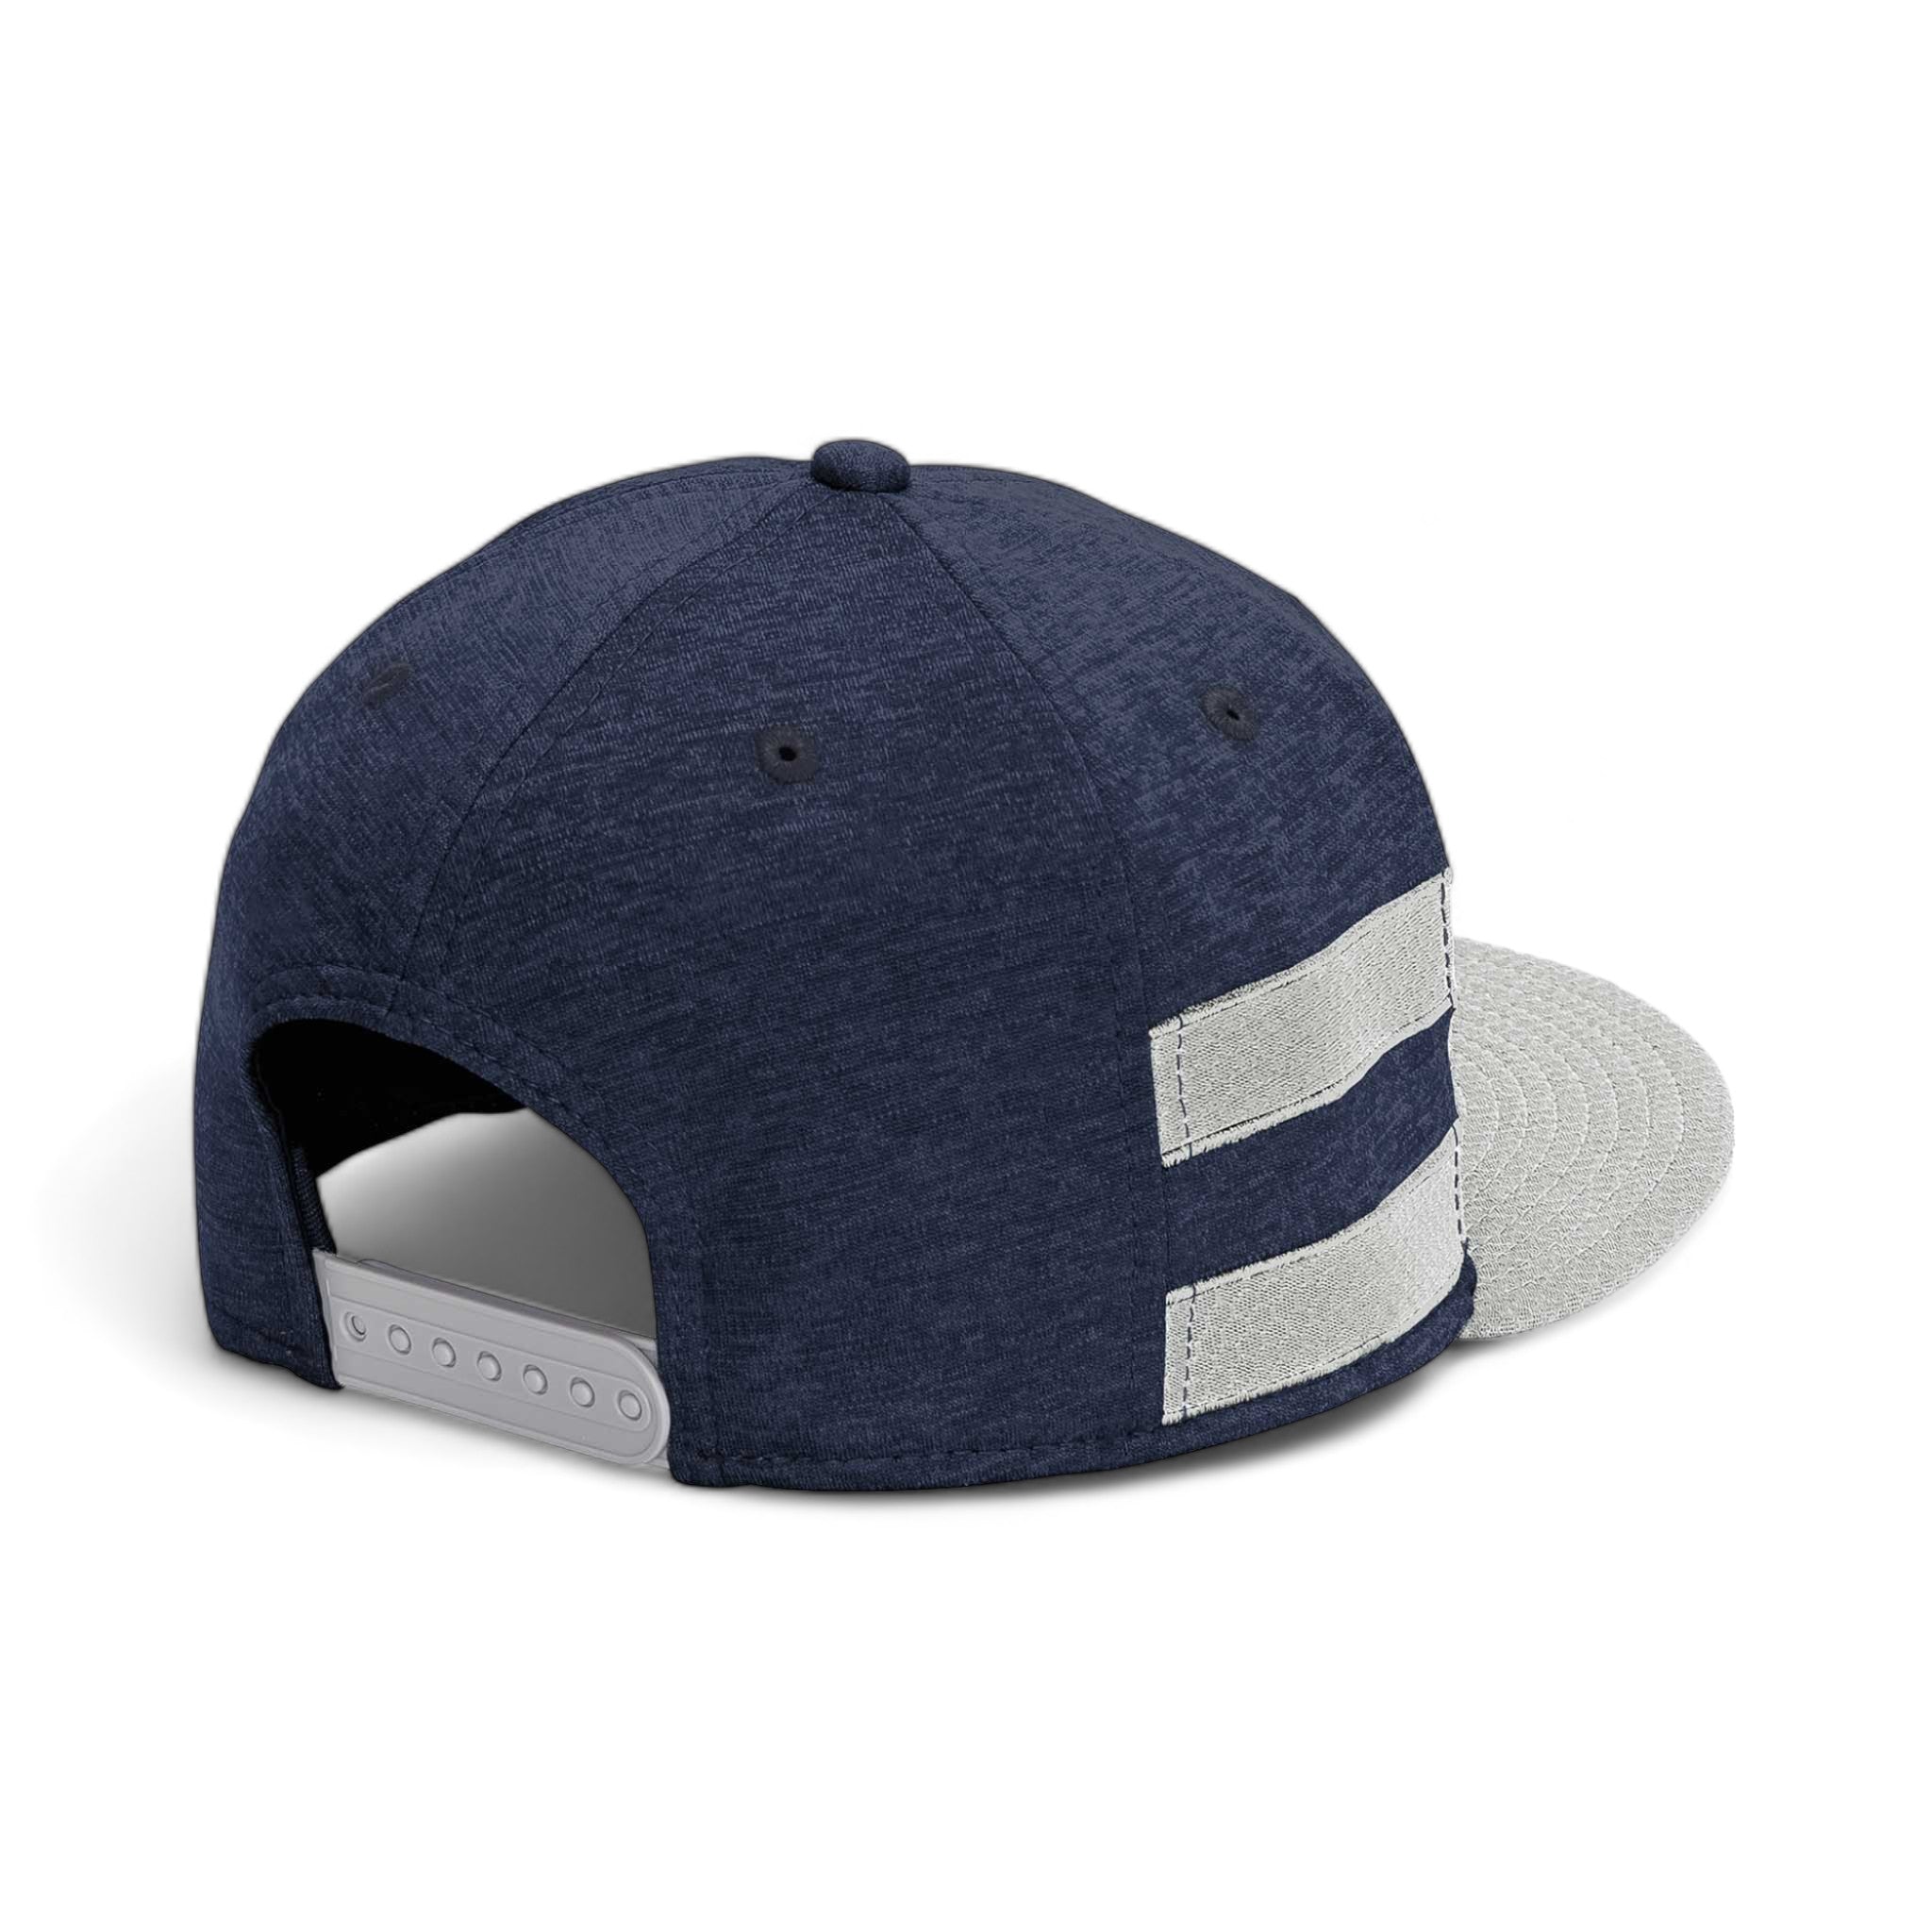 Back view of New Era NE408 custom hat in navy shadow heather and grey